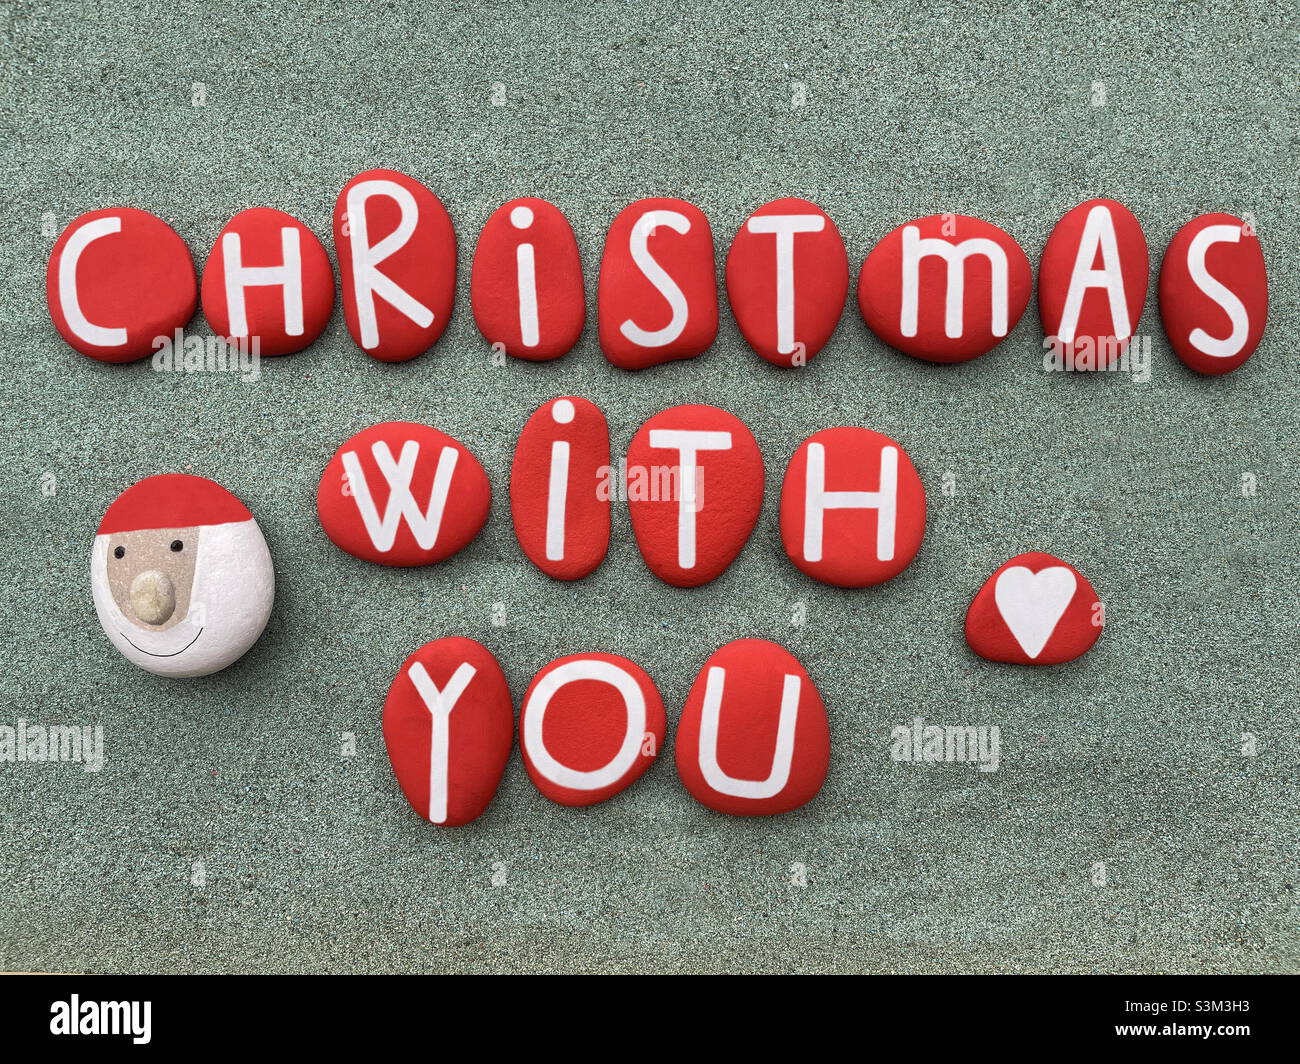 Christmas with you, creative phrase composed with hand painted red stone letters and s stone Santa Claus over green sand Stock Photo